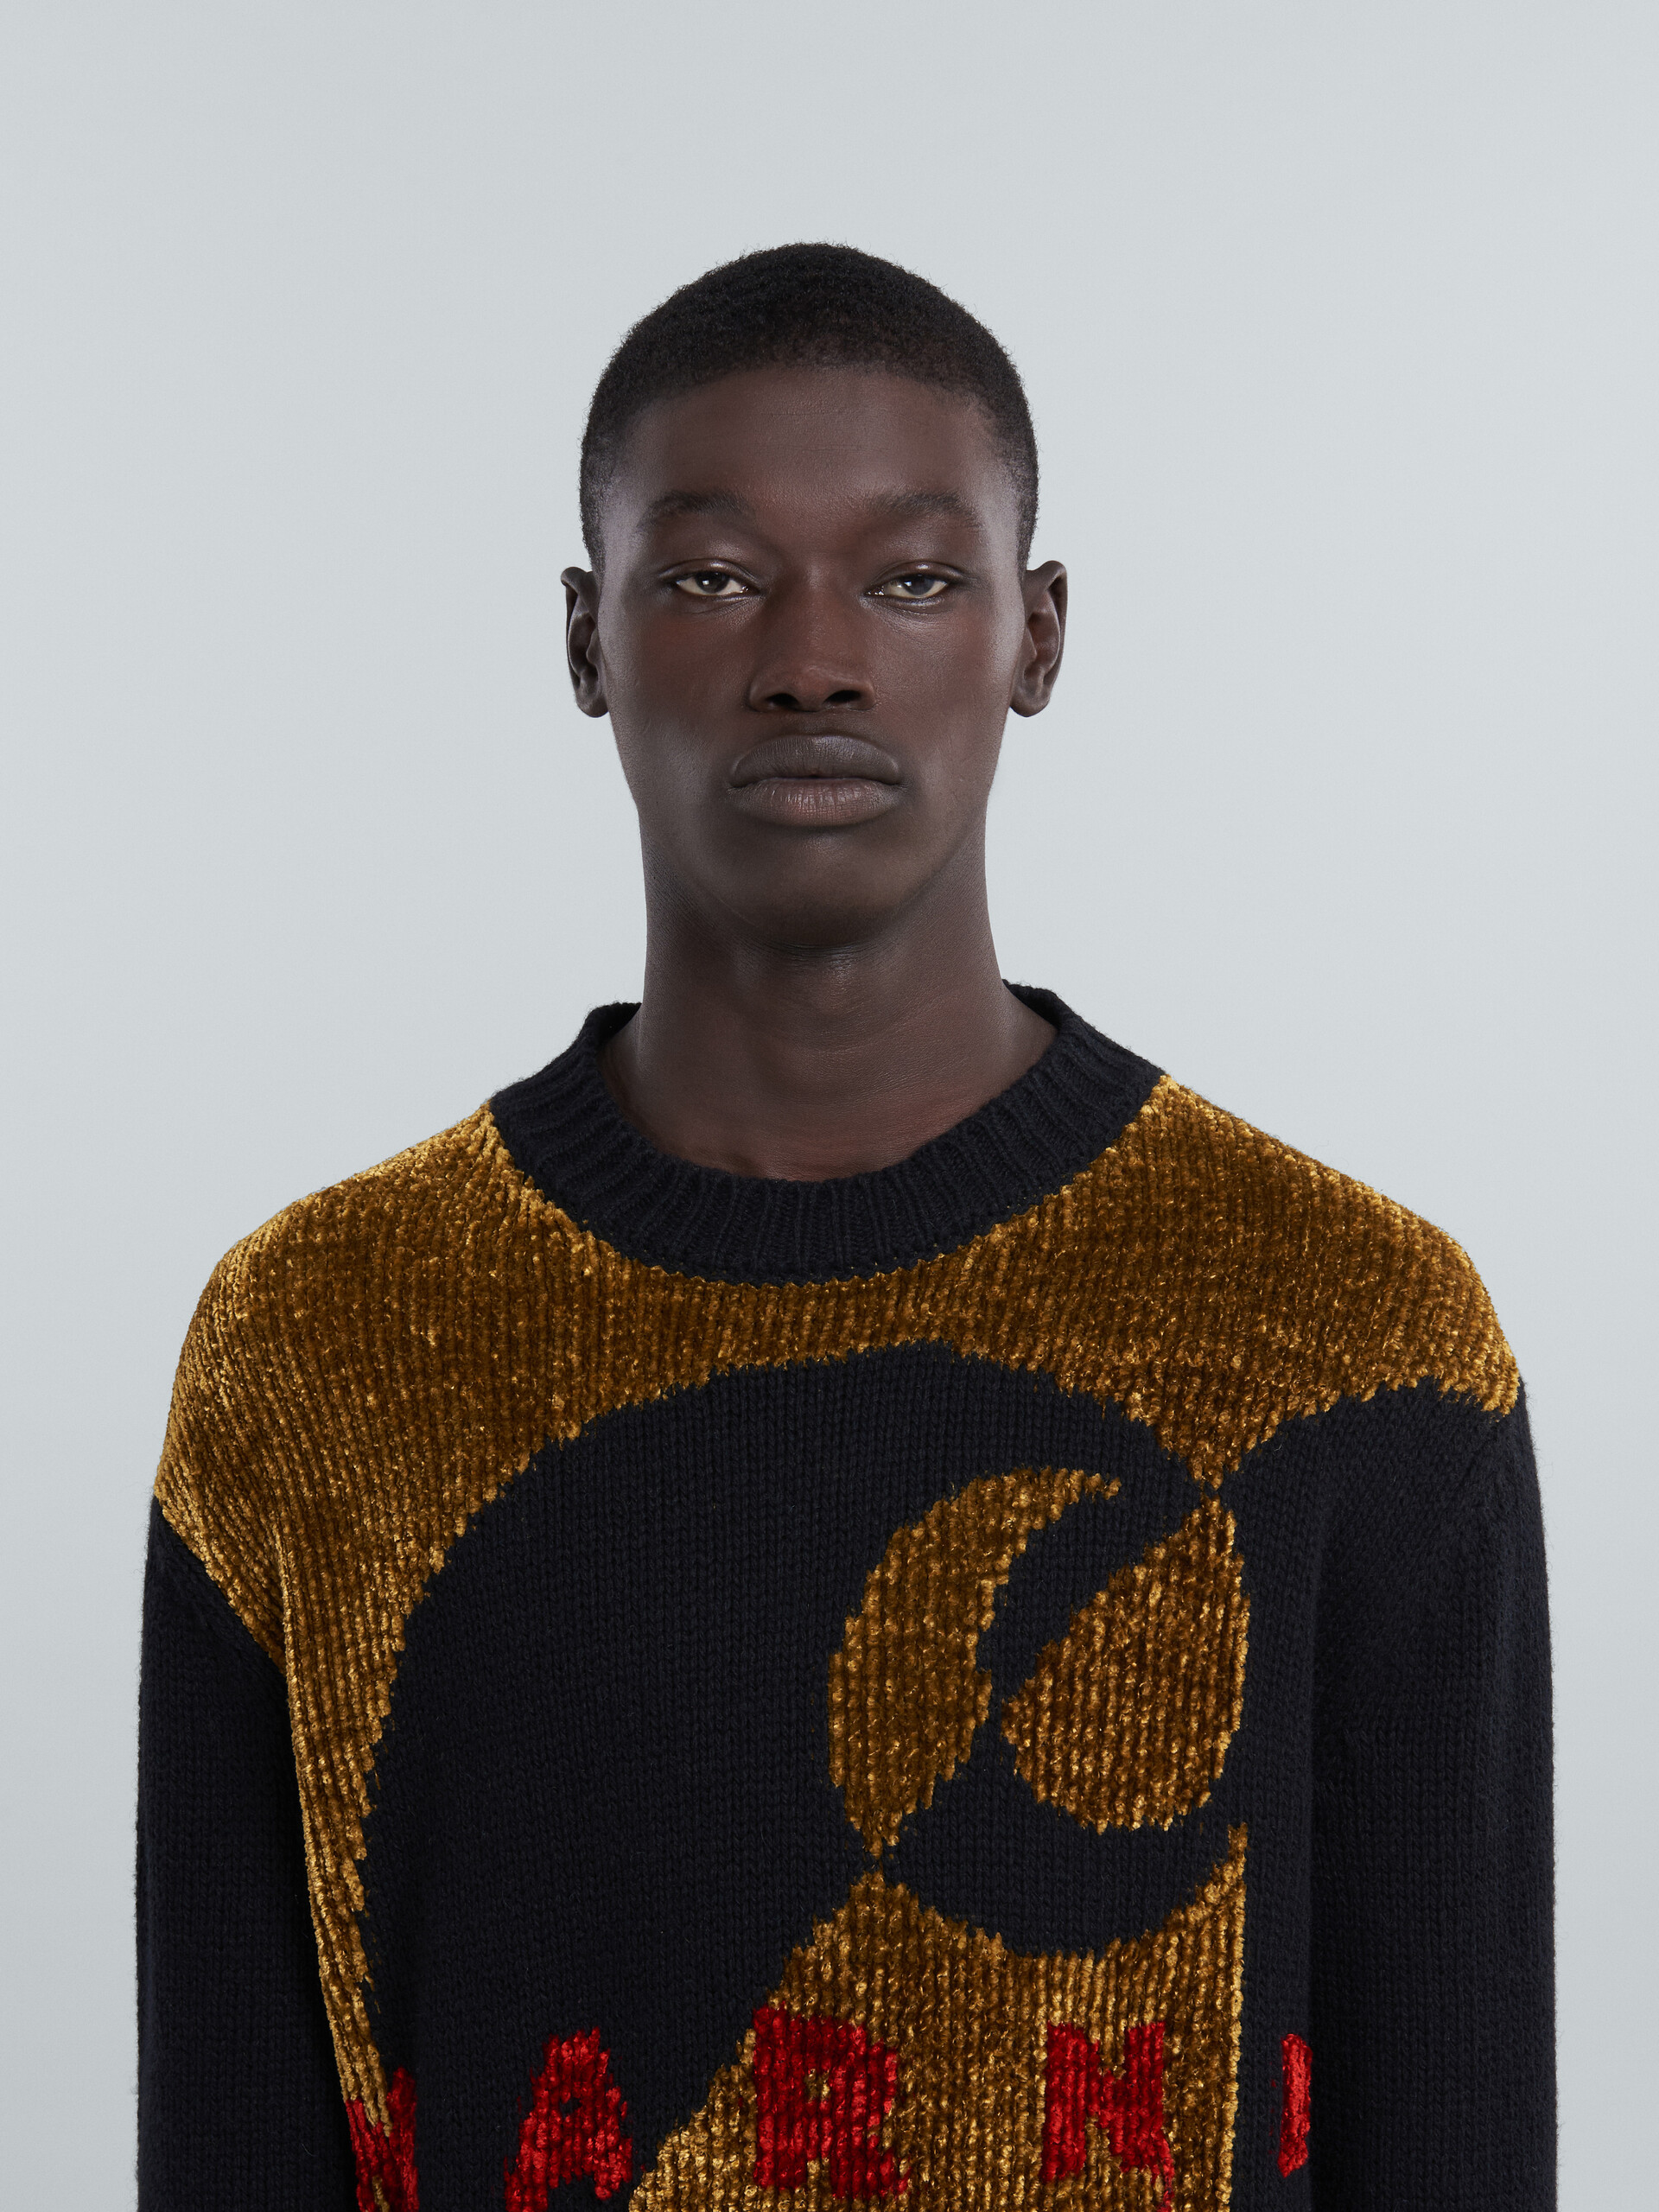 MARNI x CARHARTT WIP - Crewneck sweater in black wool and chenille with logo - Pullovers - Image 4